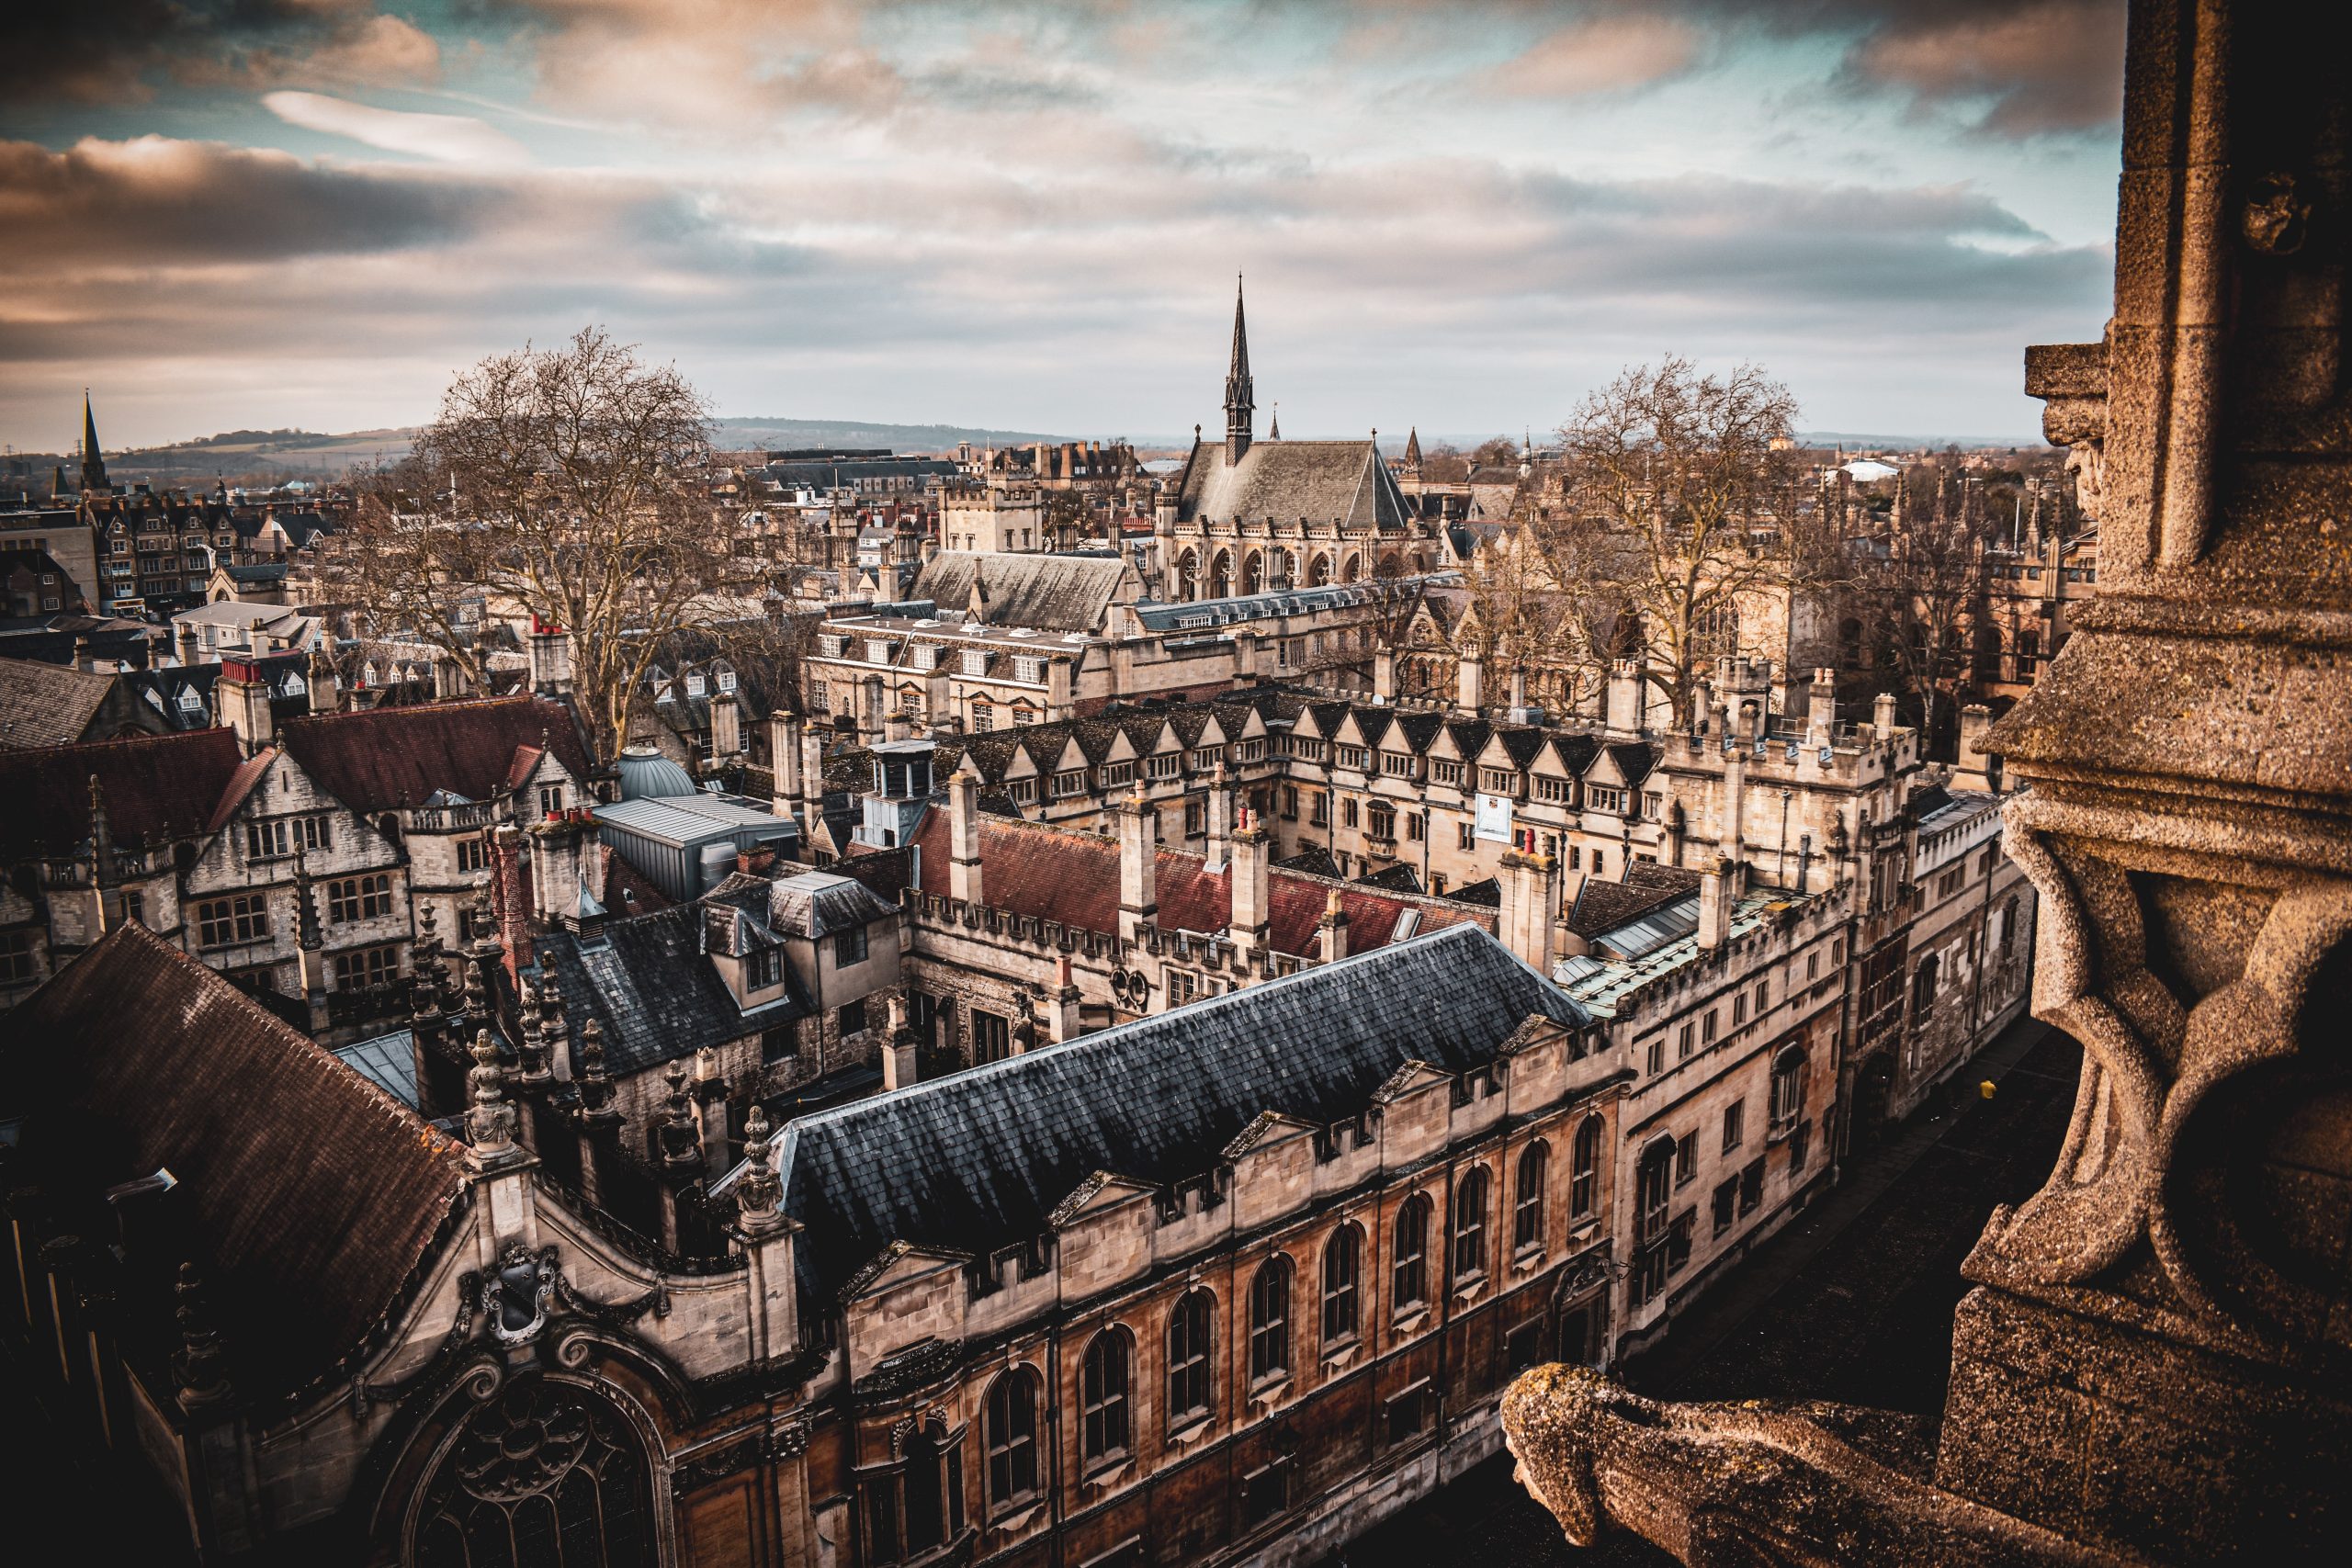 View from the University Church of St Mary the Virgin, opposite the Radcliffe Camera in Oxford. Bird's eye view of the city of dreaming spires.